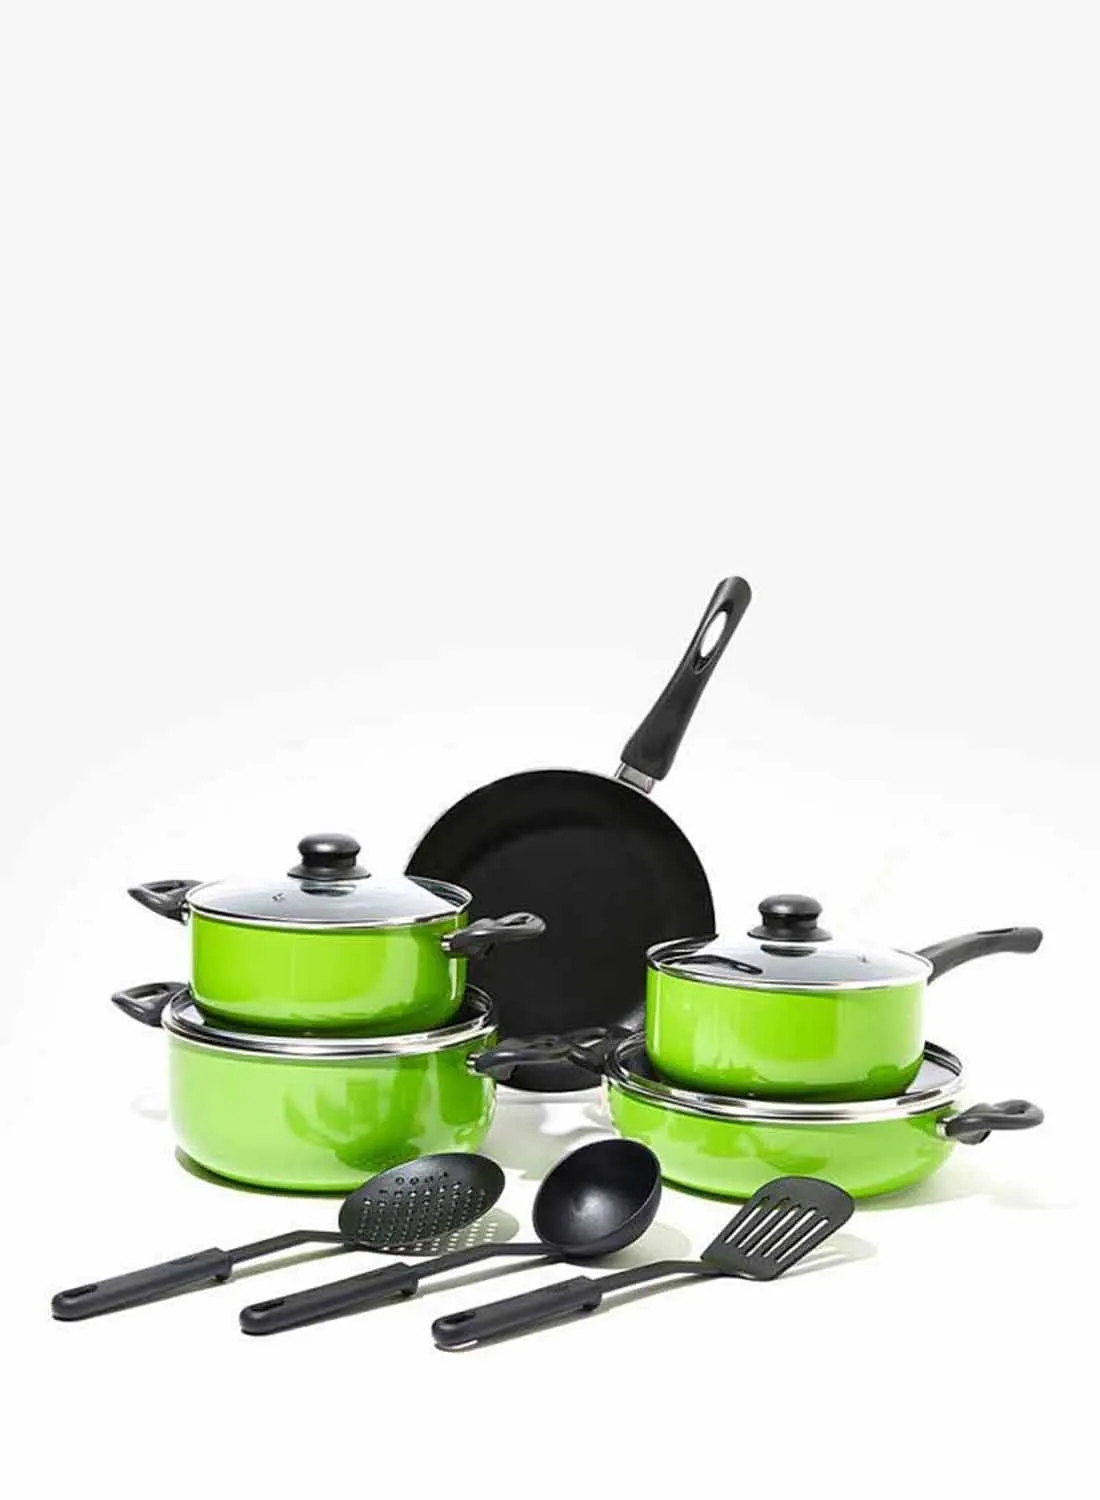 Amal 12-Piece 12 Piece Cookware Set - Aluminum Pots And Pans - Non-Stick Surface - Tempered Glass Lids - PFOA Free - Frying Pan, Casserole With Lid, Saucepan With Lid, Kitchen Tools - Green Green